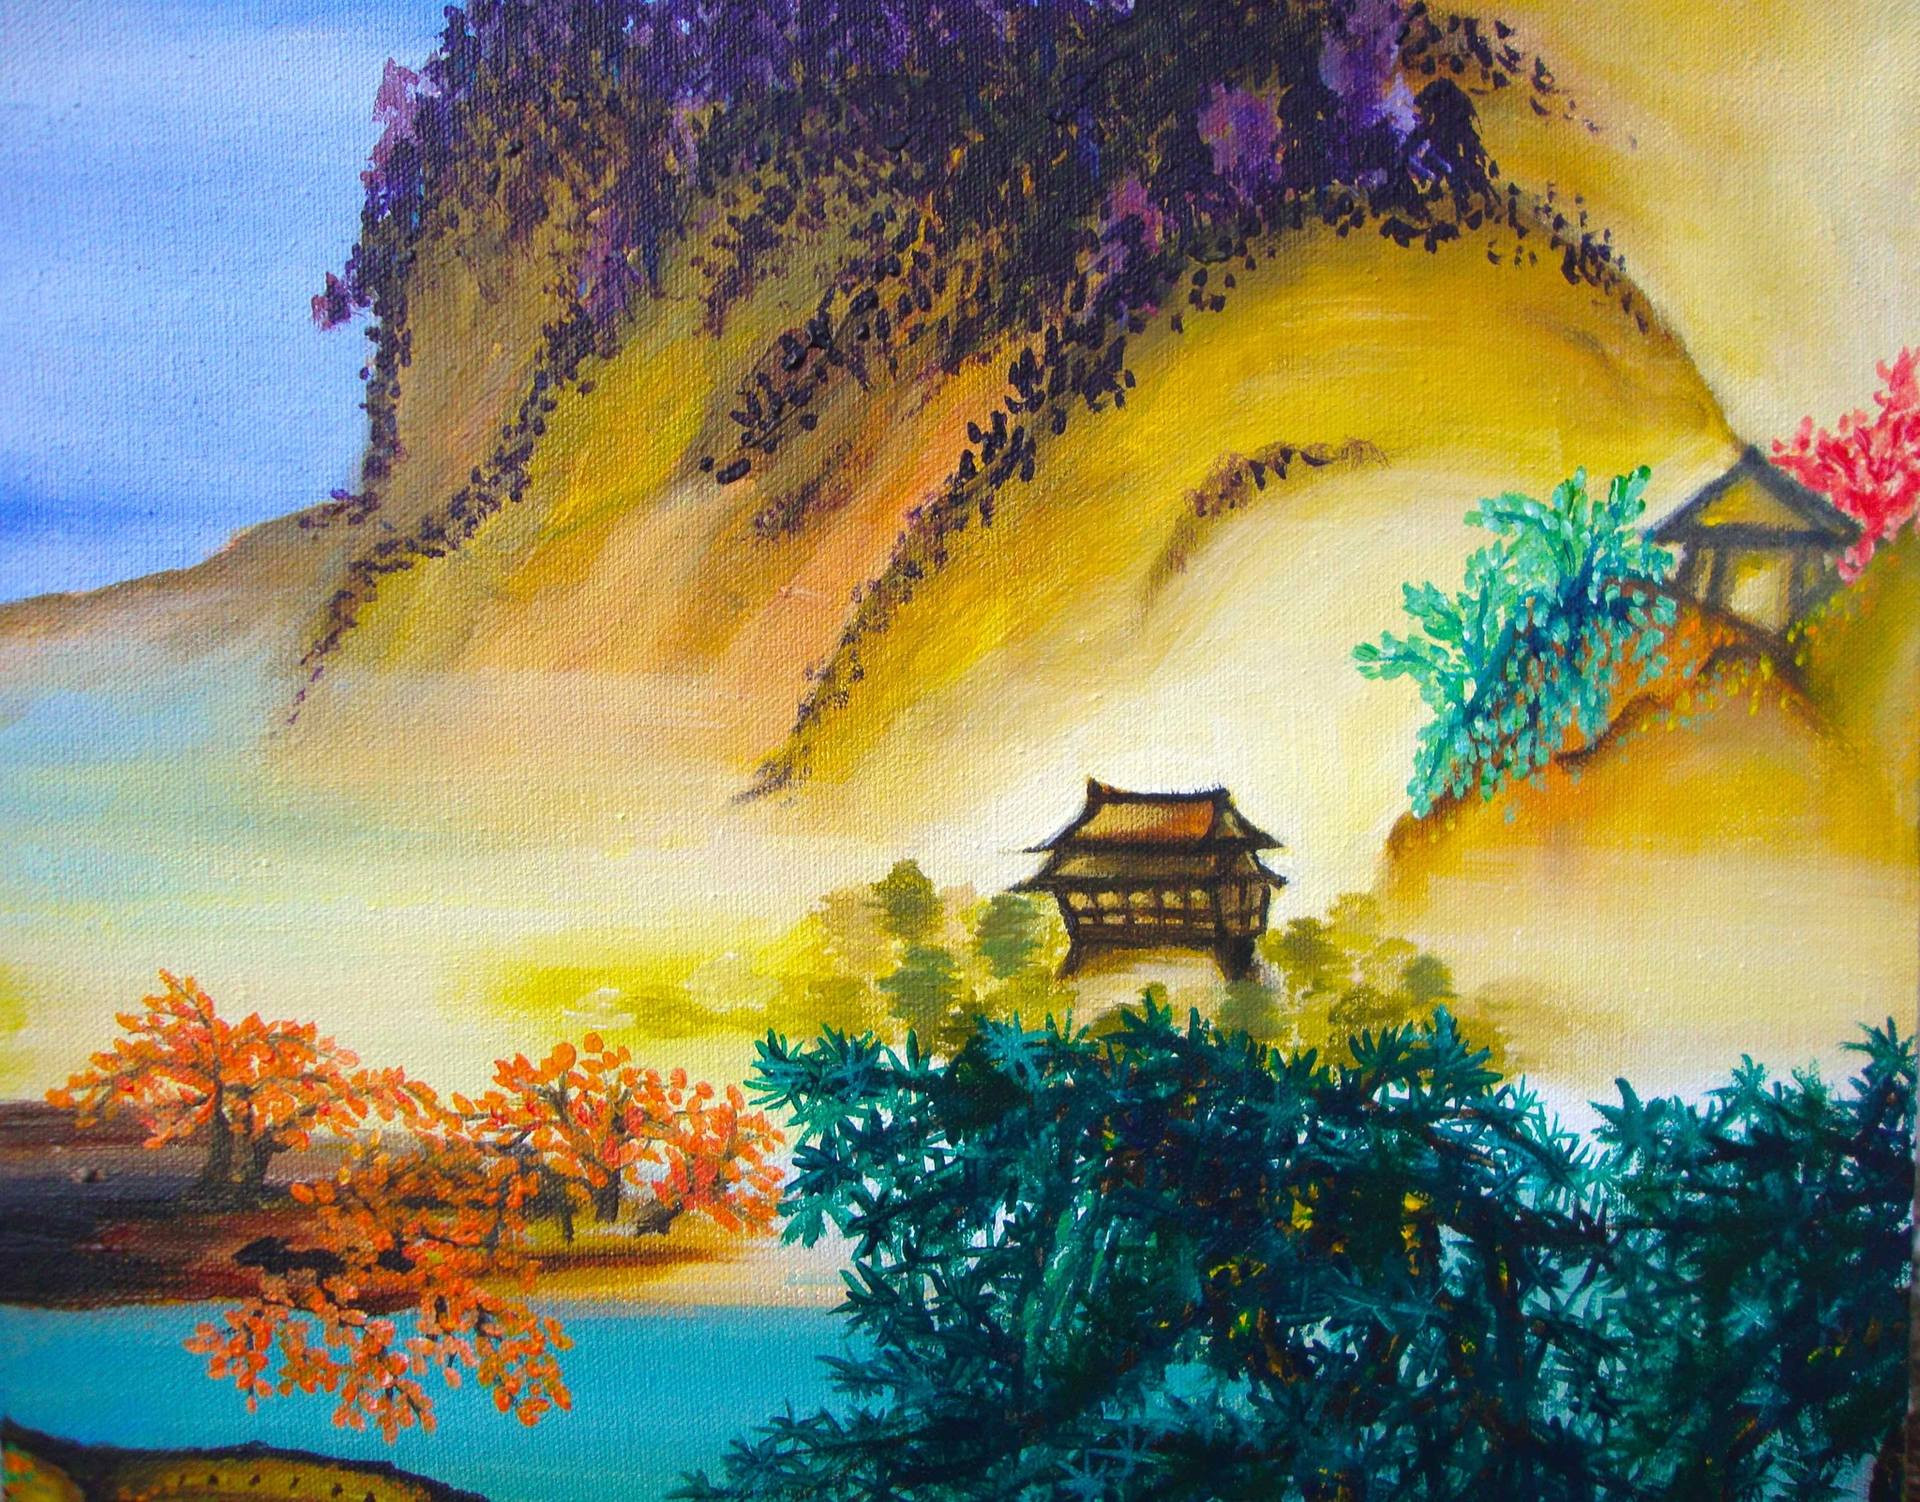 Chinese Landscape Paintings
 Saatchi Art Colourful Ancient Chinese Landscape Painting